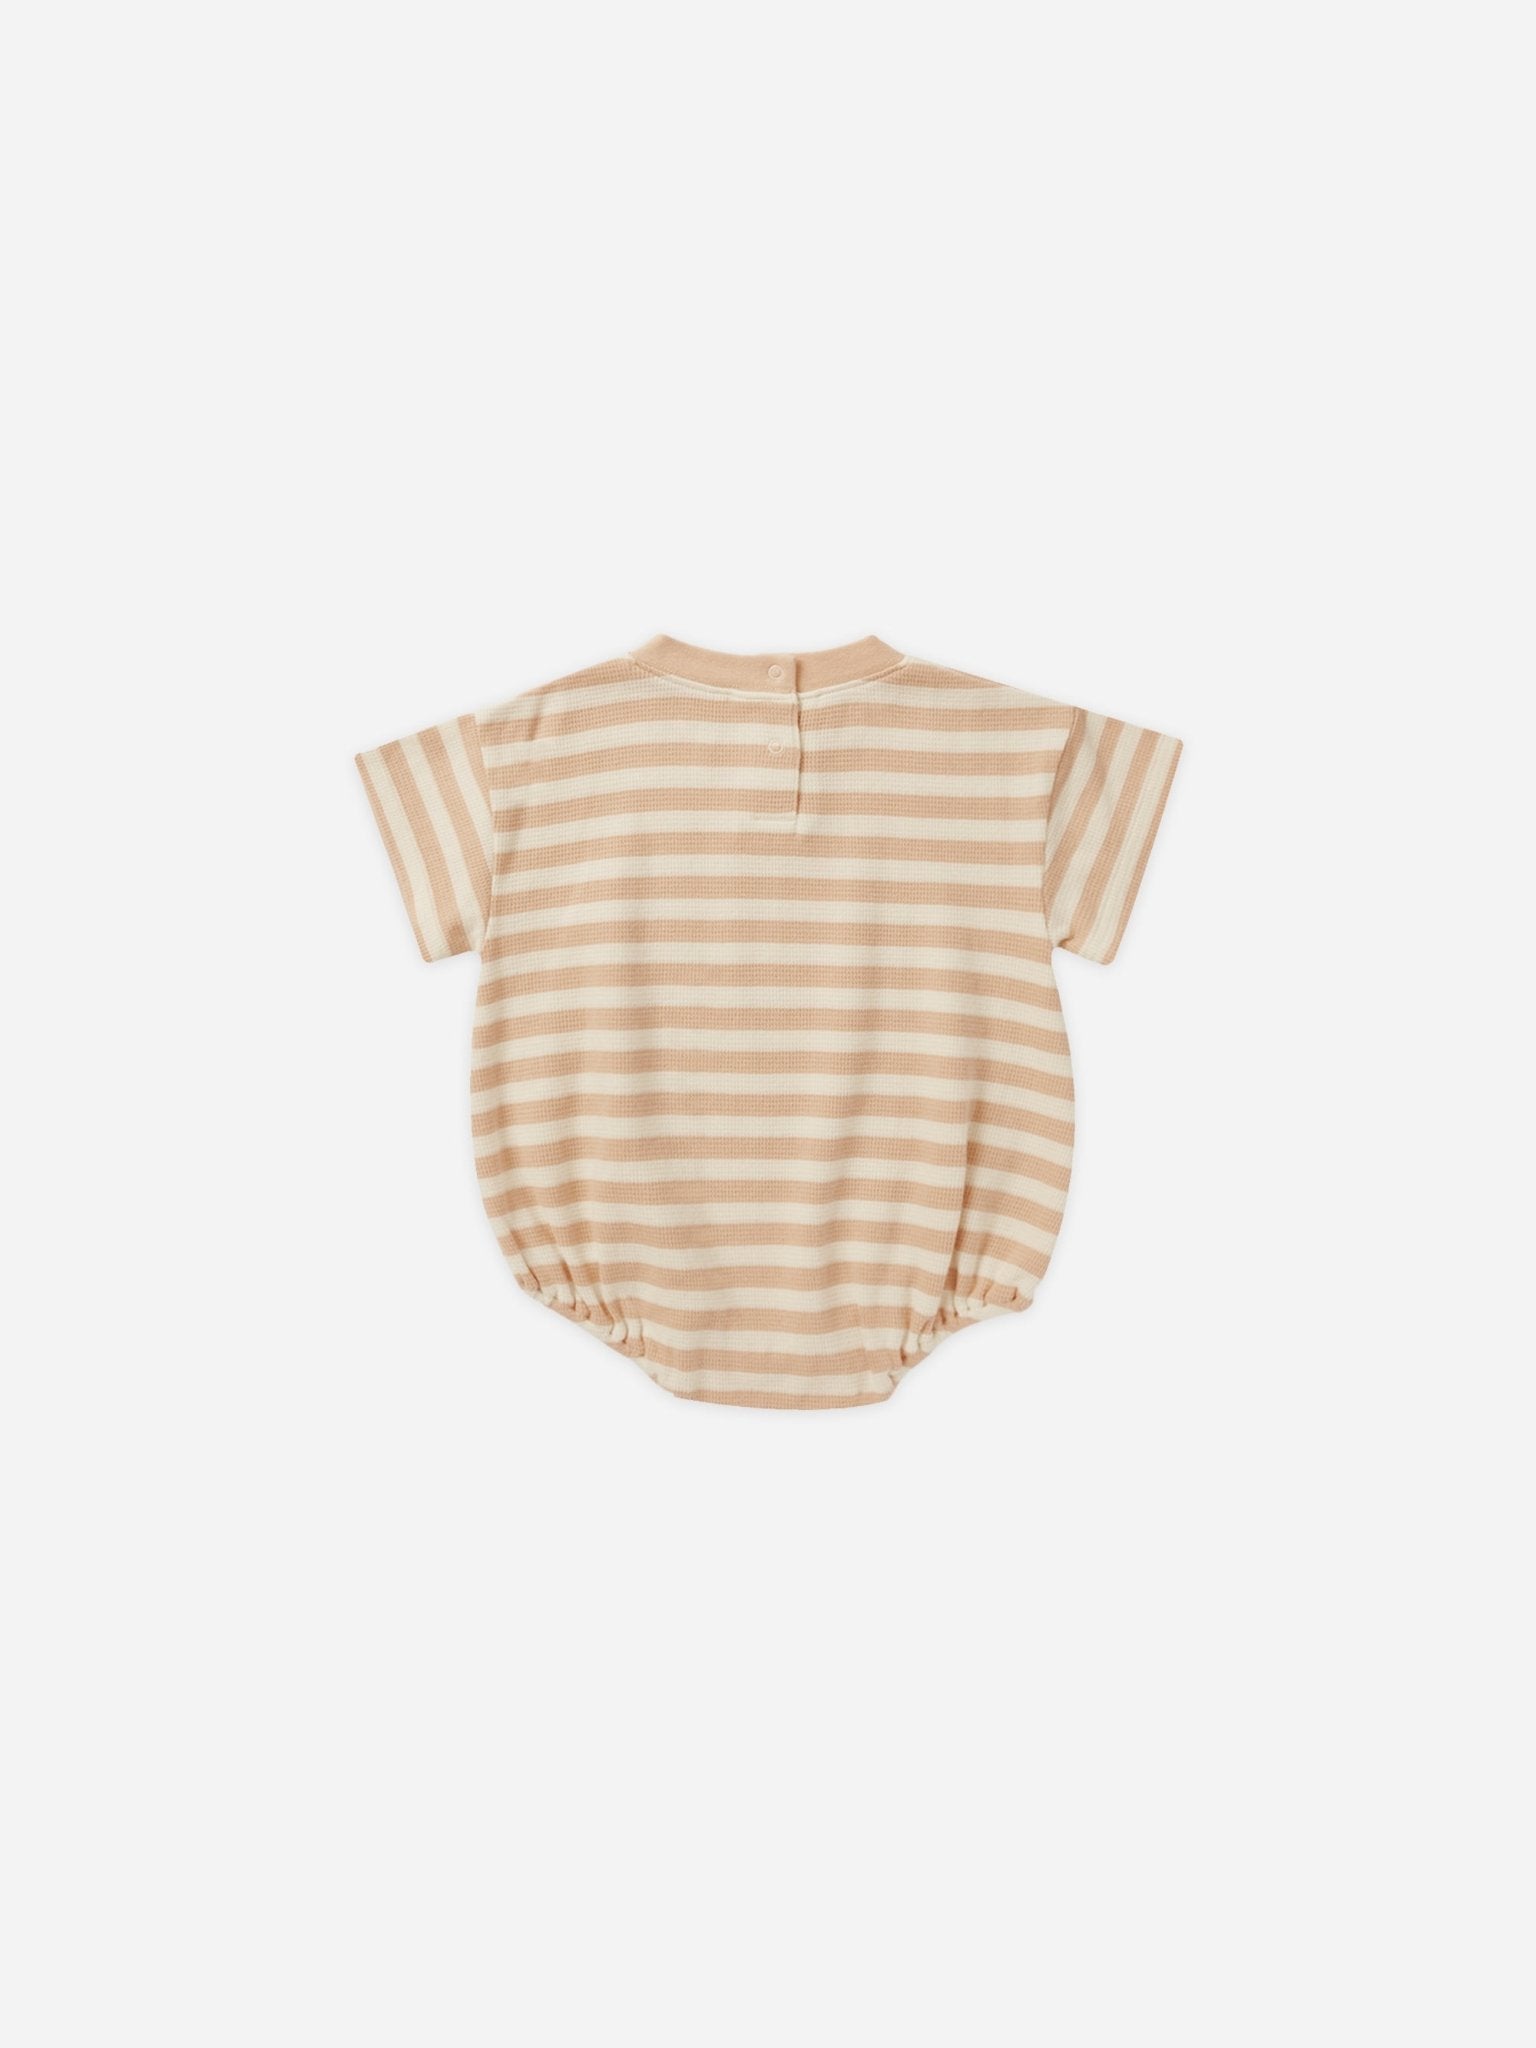 Relaxed Bubble Romper || Apricot Stripe - Rylee + Cru Canada